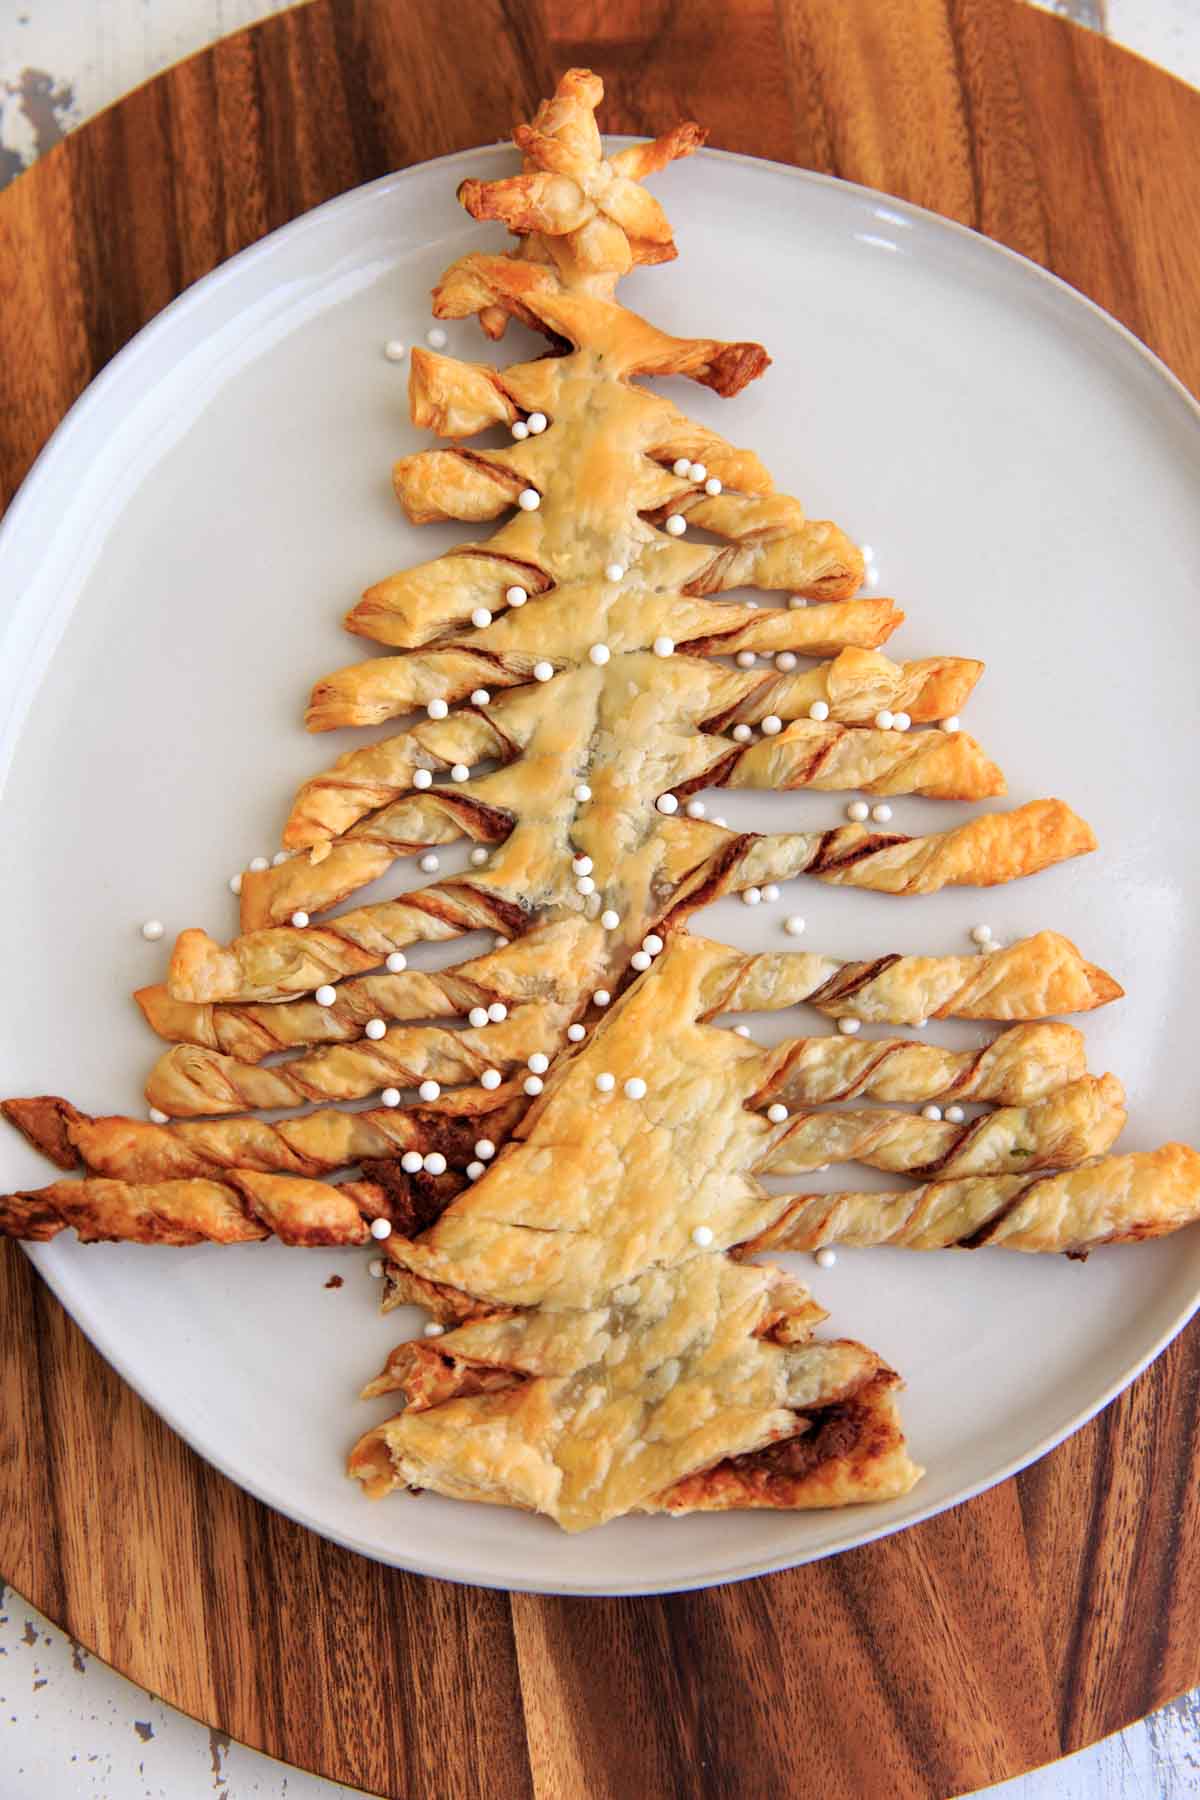 A Christmas-tree shaped puff pastry dessert on white plate